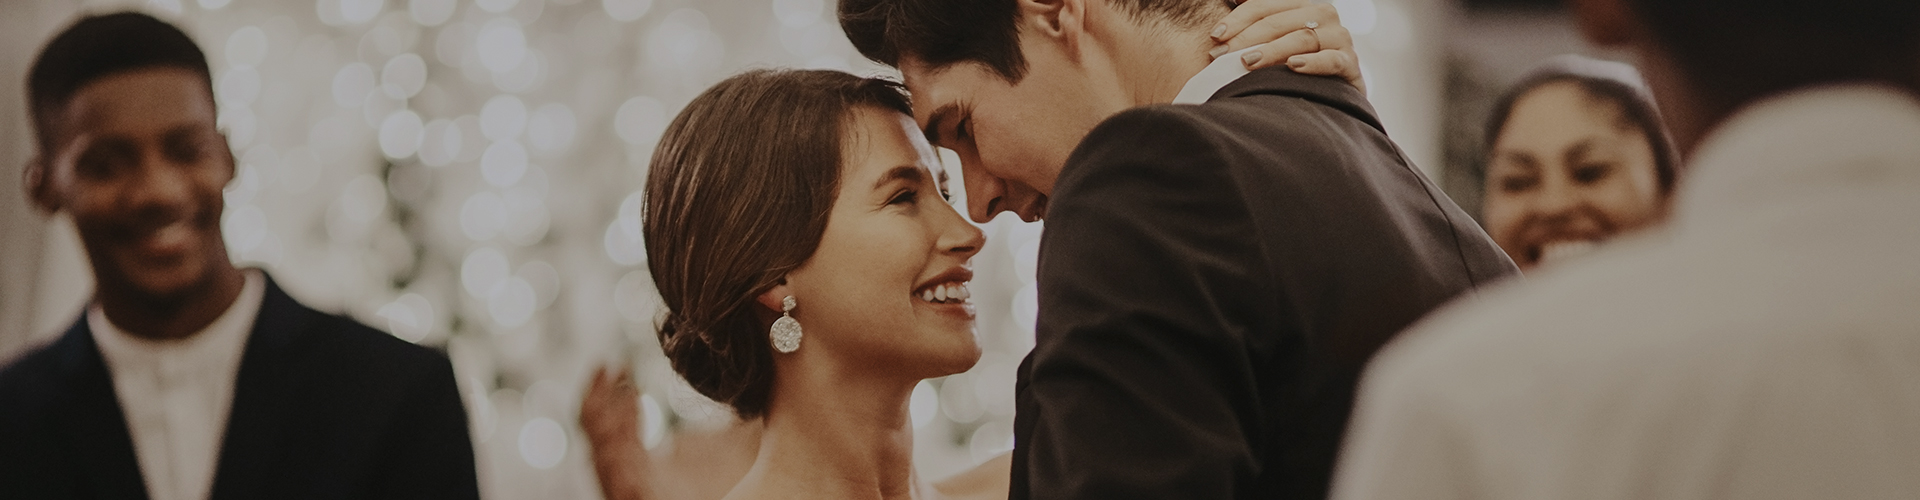 closeup image of a bride and a groom smiling looking at each other 